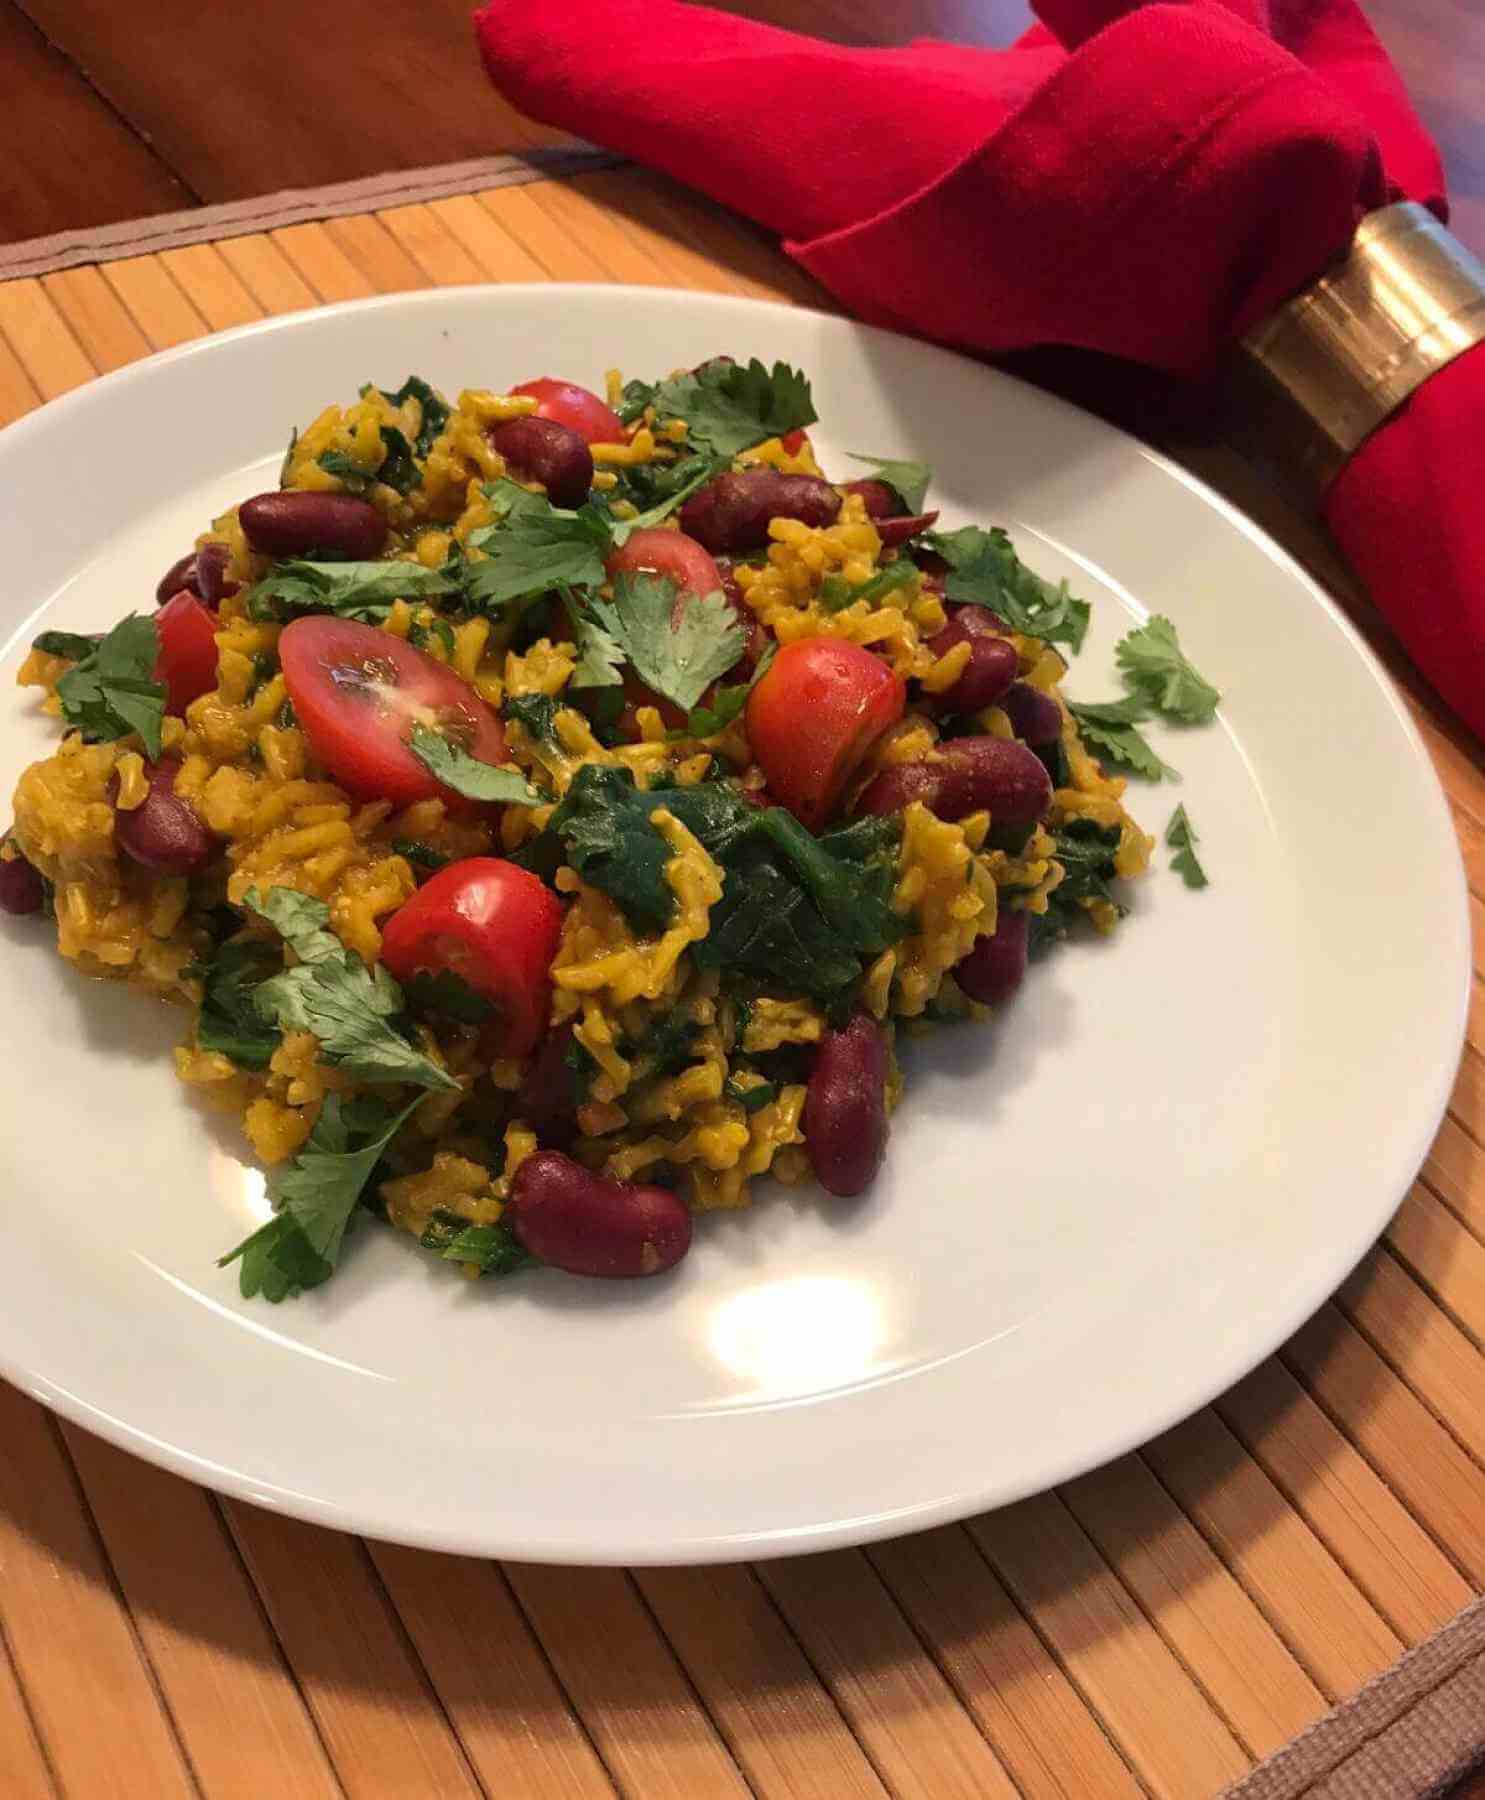 Turmeric Rice and Beans with Cherry Tomatoes